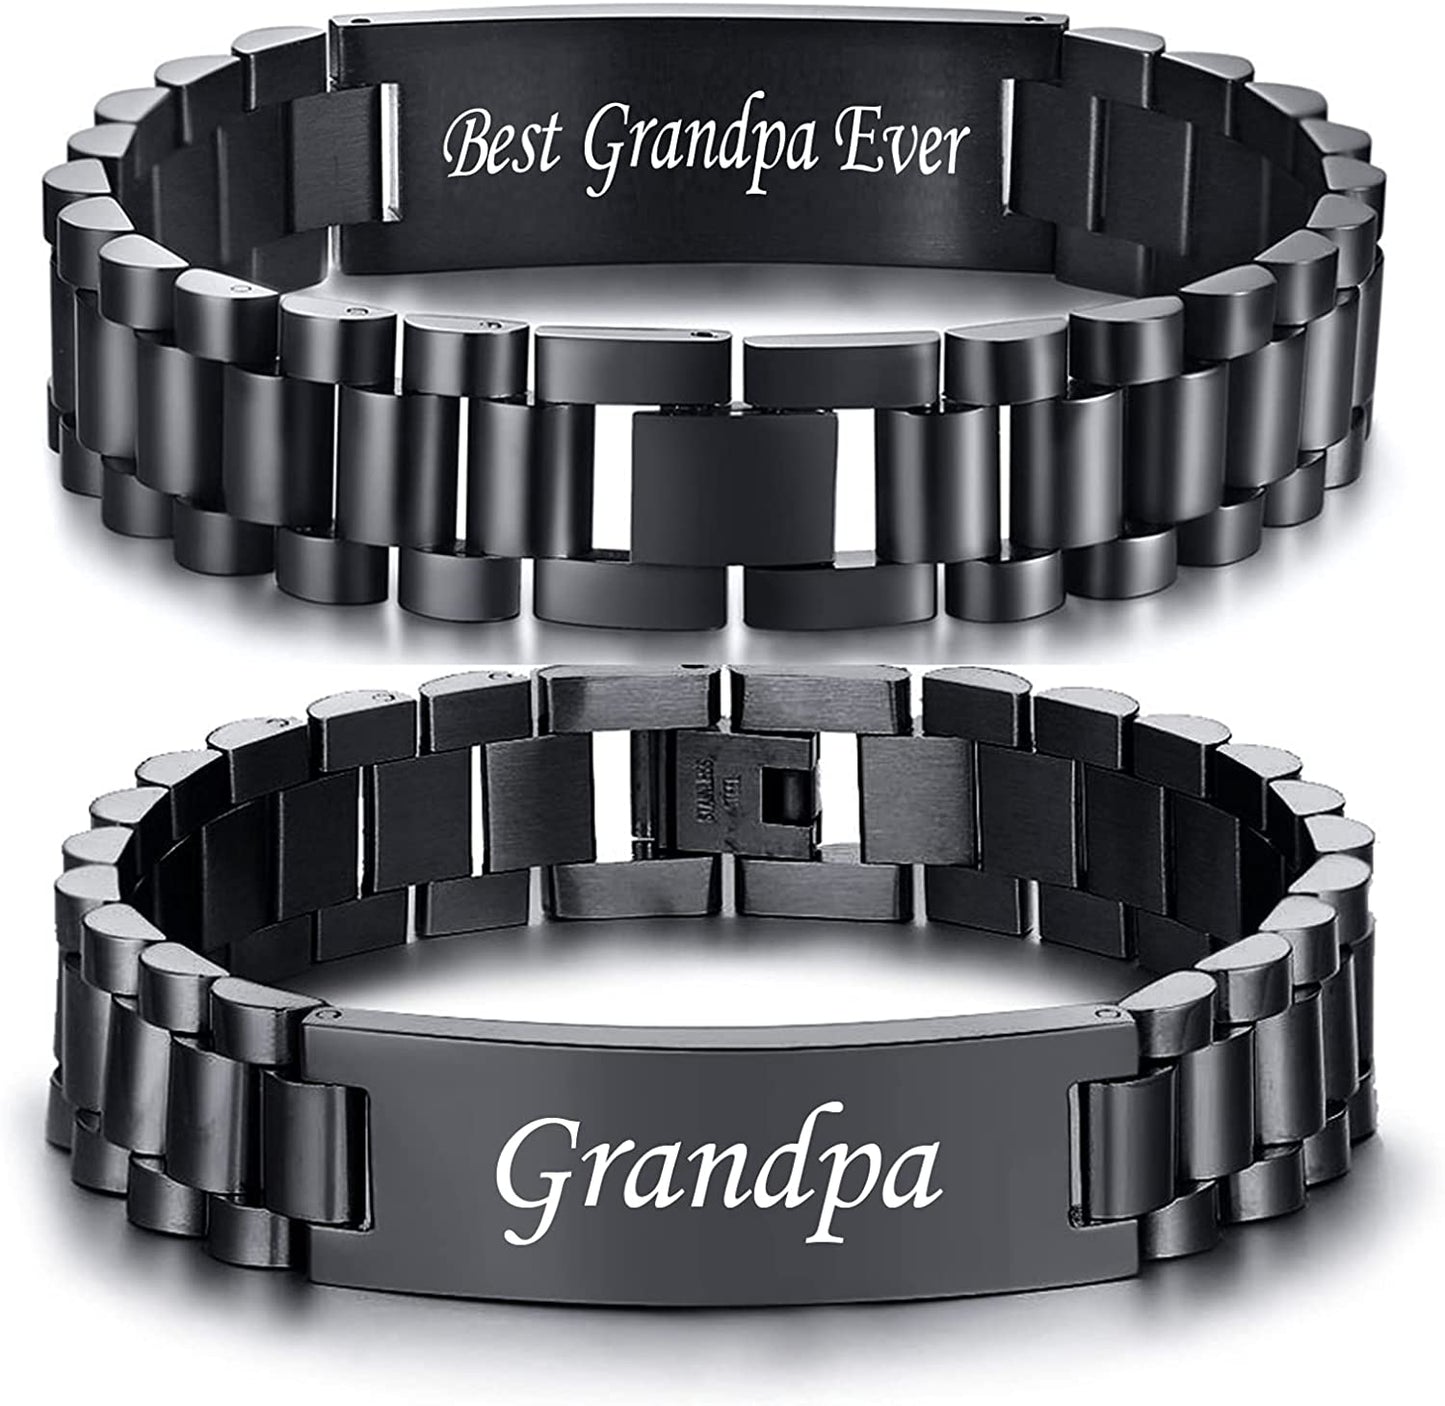 Watch Band Stainless Steel Link Bracelet Personalized Engraved DAD Jewelry Gift for Men DAD Father